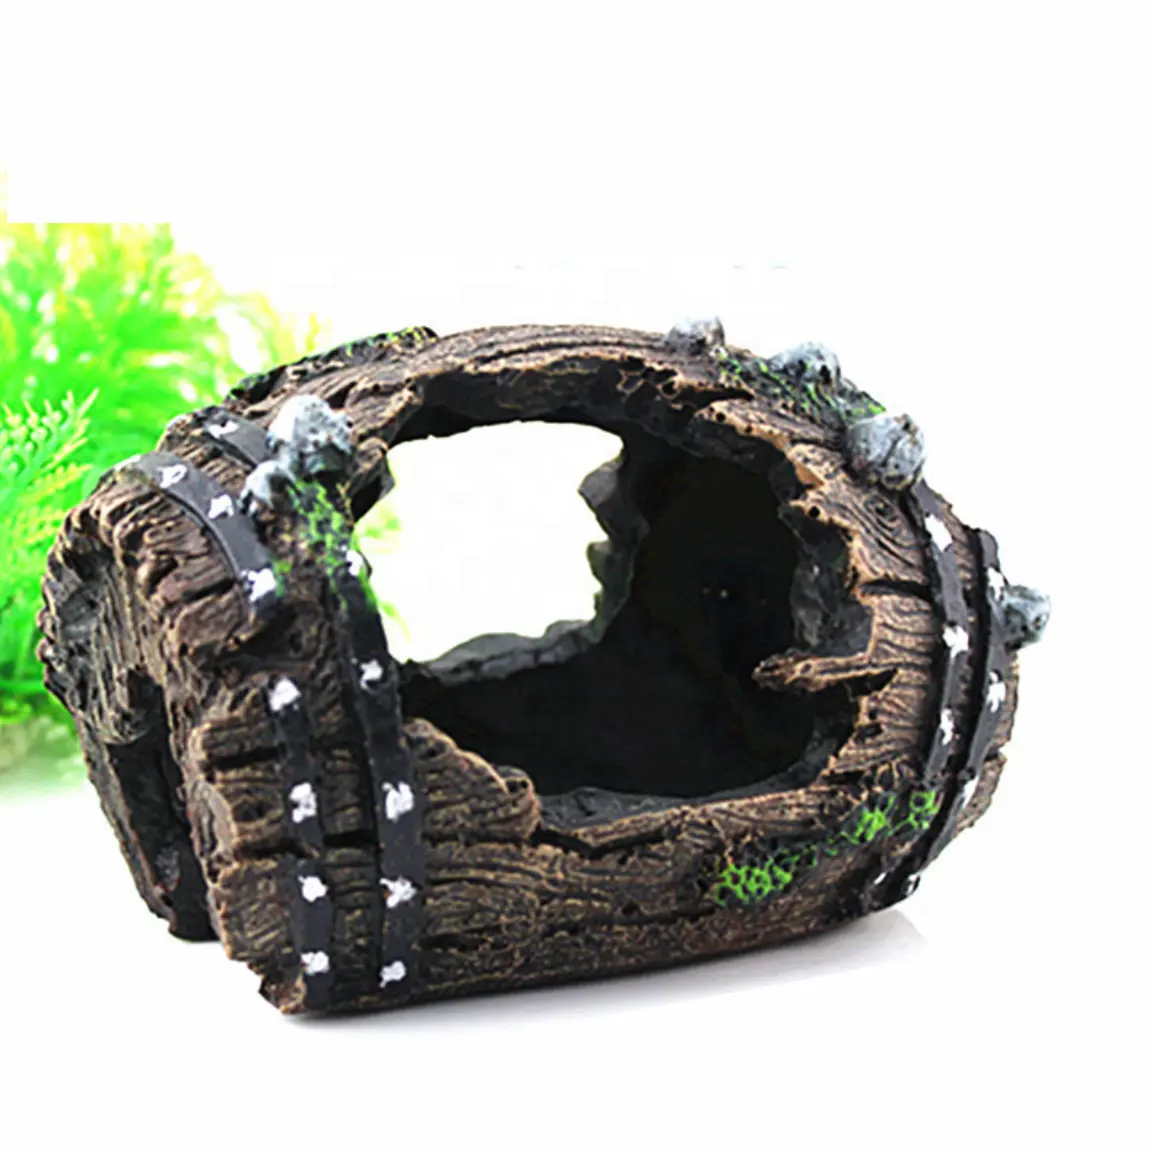 Wholesale Fish tank decoration landscaping resin crafts ornaments wooden barrel wreckage to avoid buckets